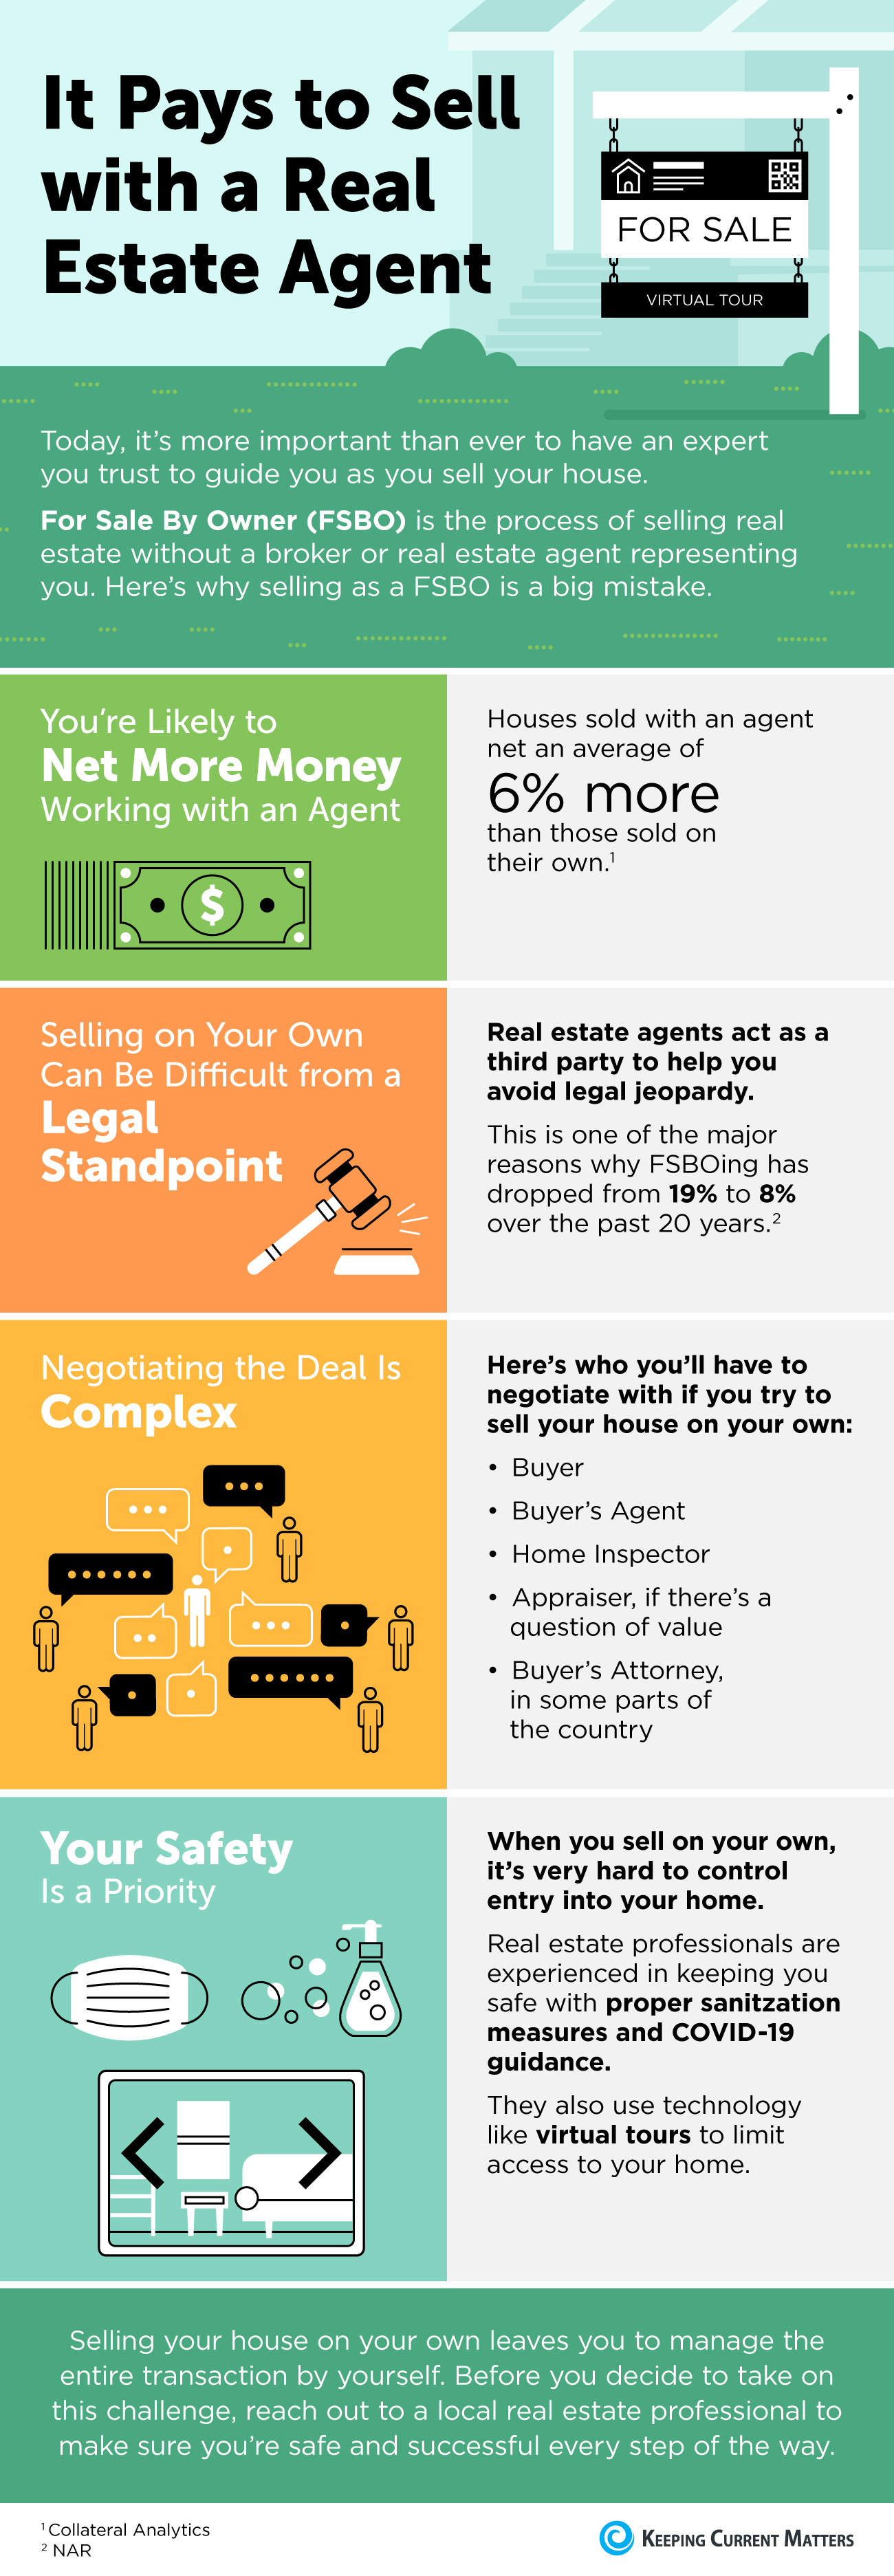 It Pays to Sell with a Real Estate Agent [INFOGRAPHIC] | Keeping Current Matters